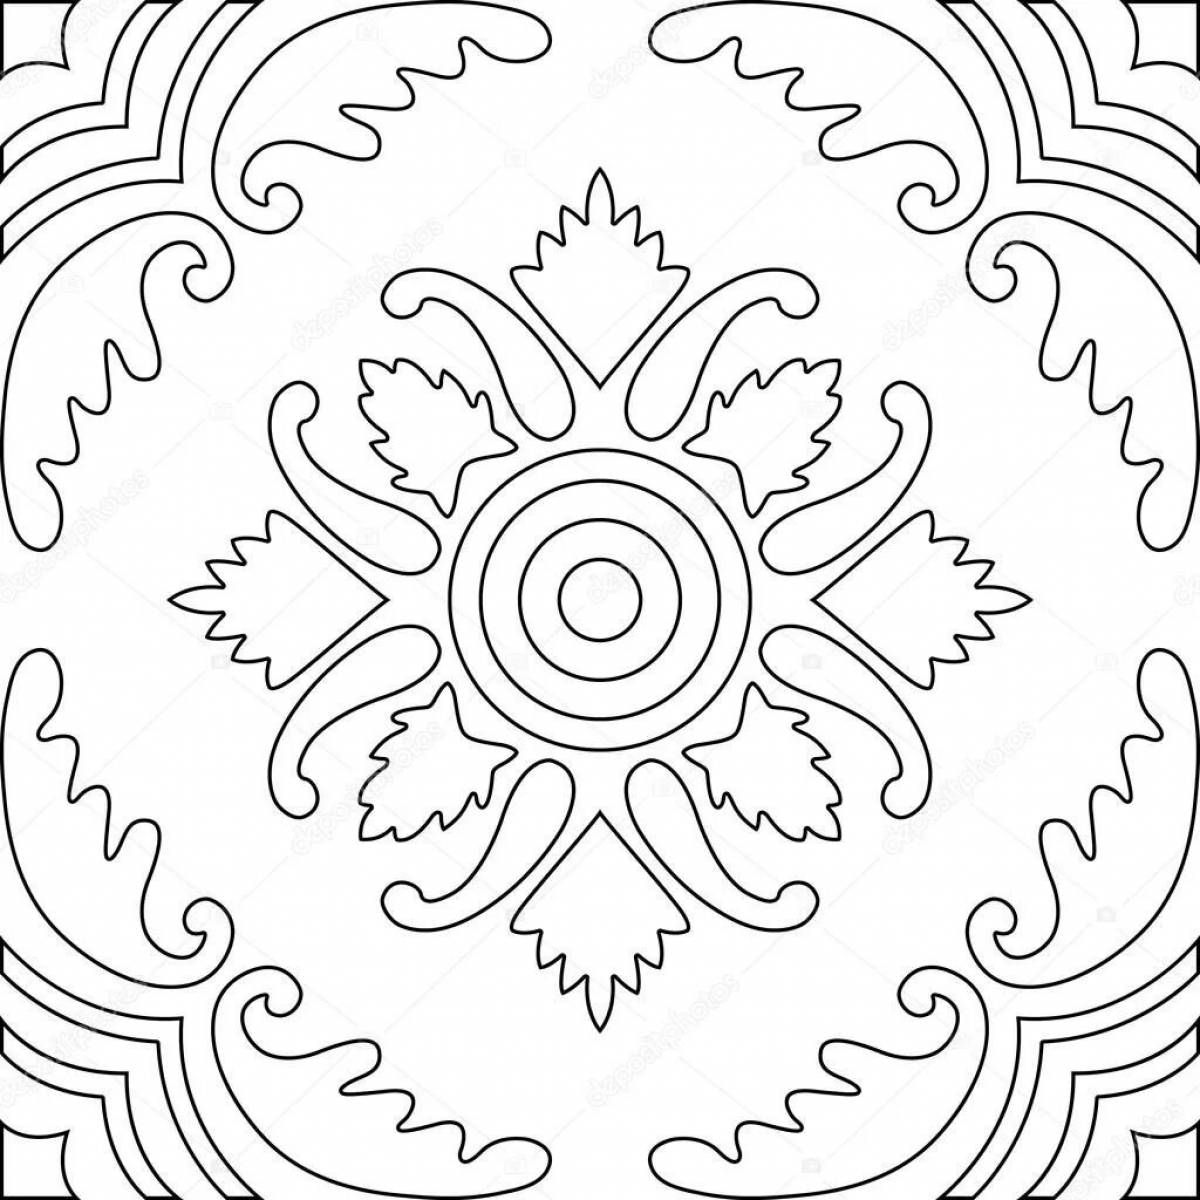 Cute Carpet Coloring Page for Toddlers